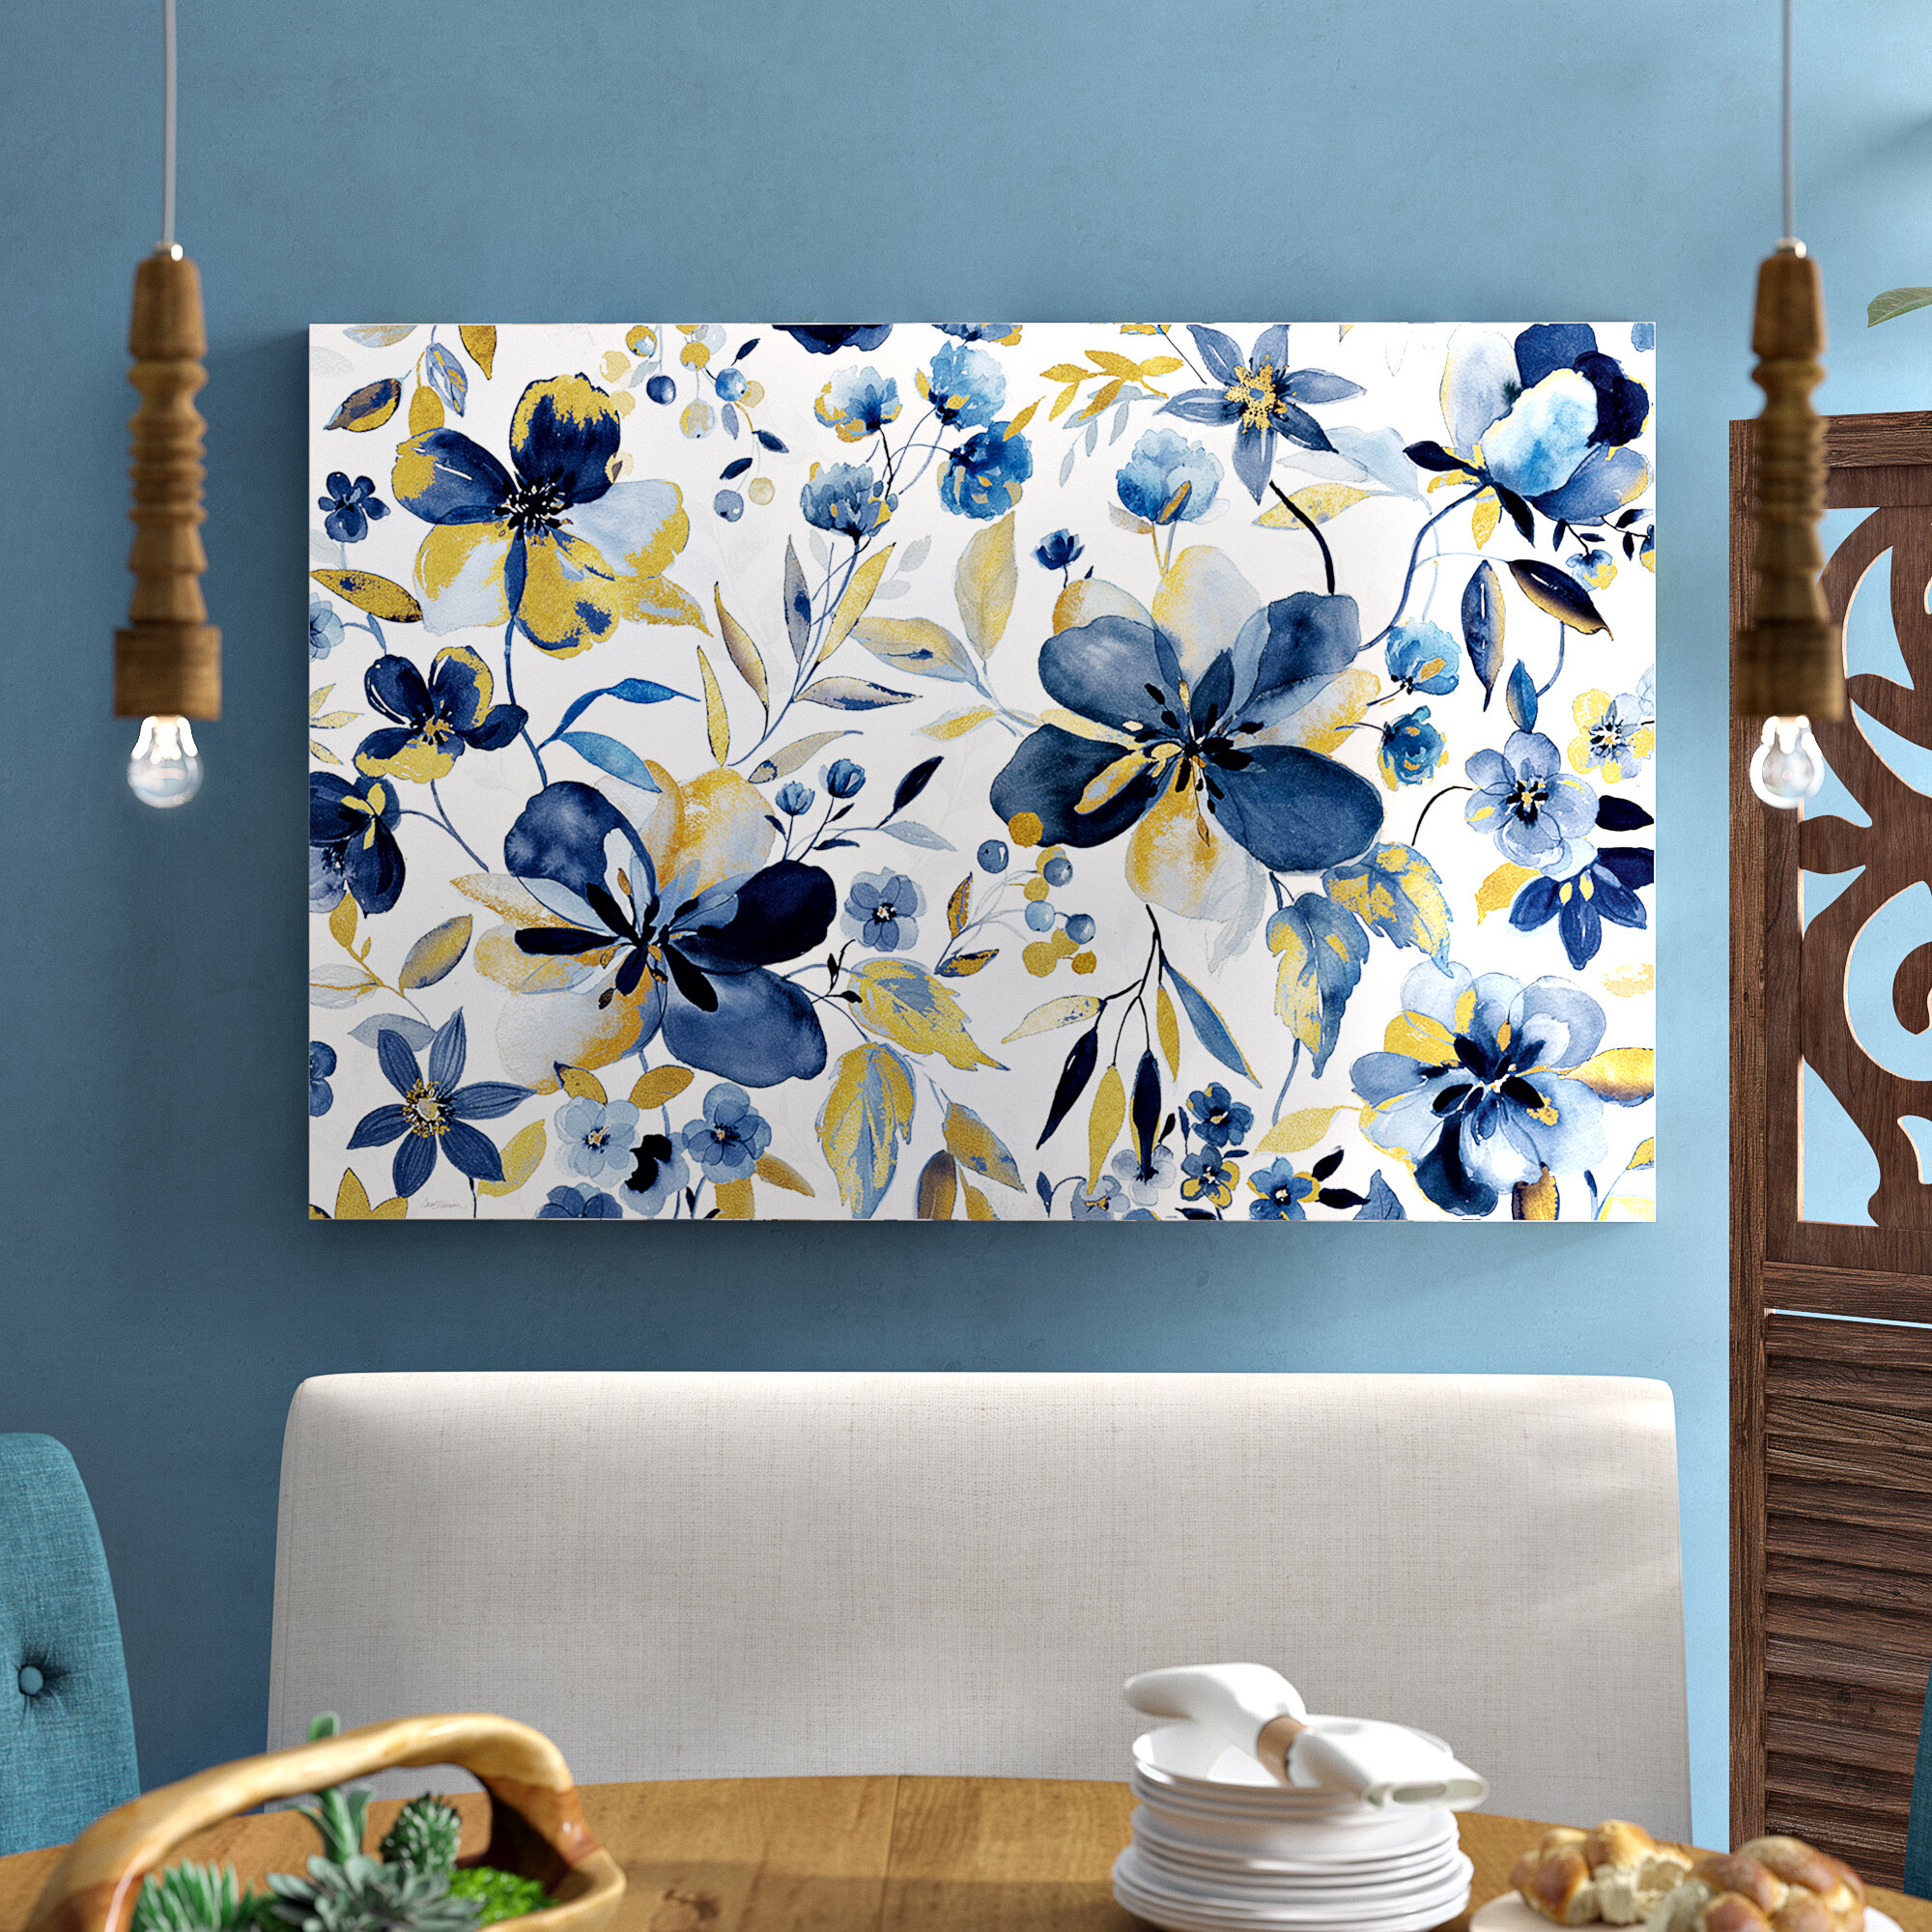 Oil Painting Wall Art You Ll Love In 2020 Wayfair